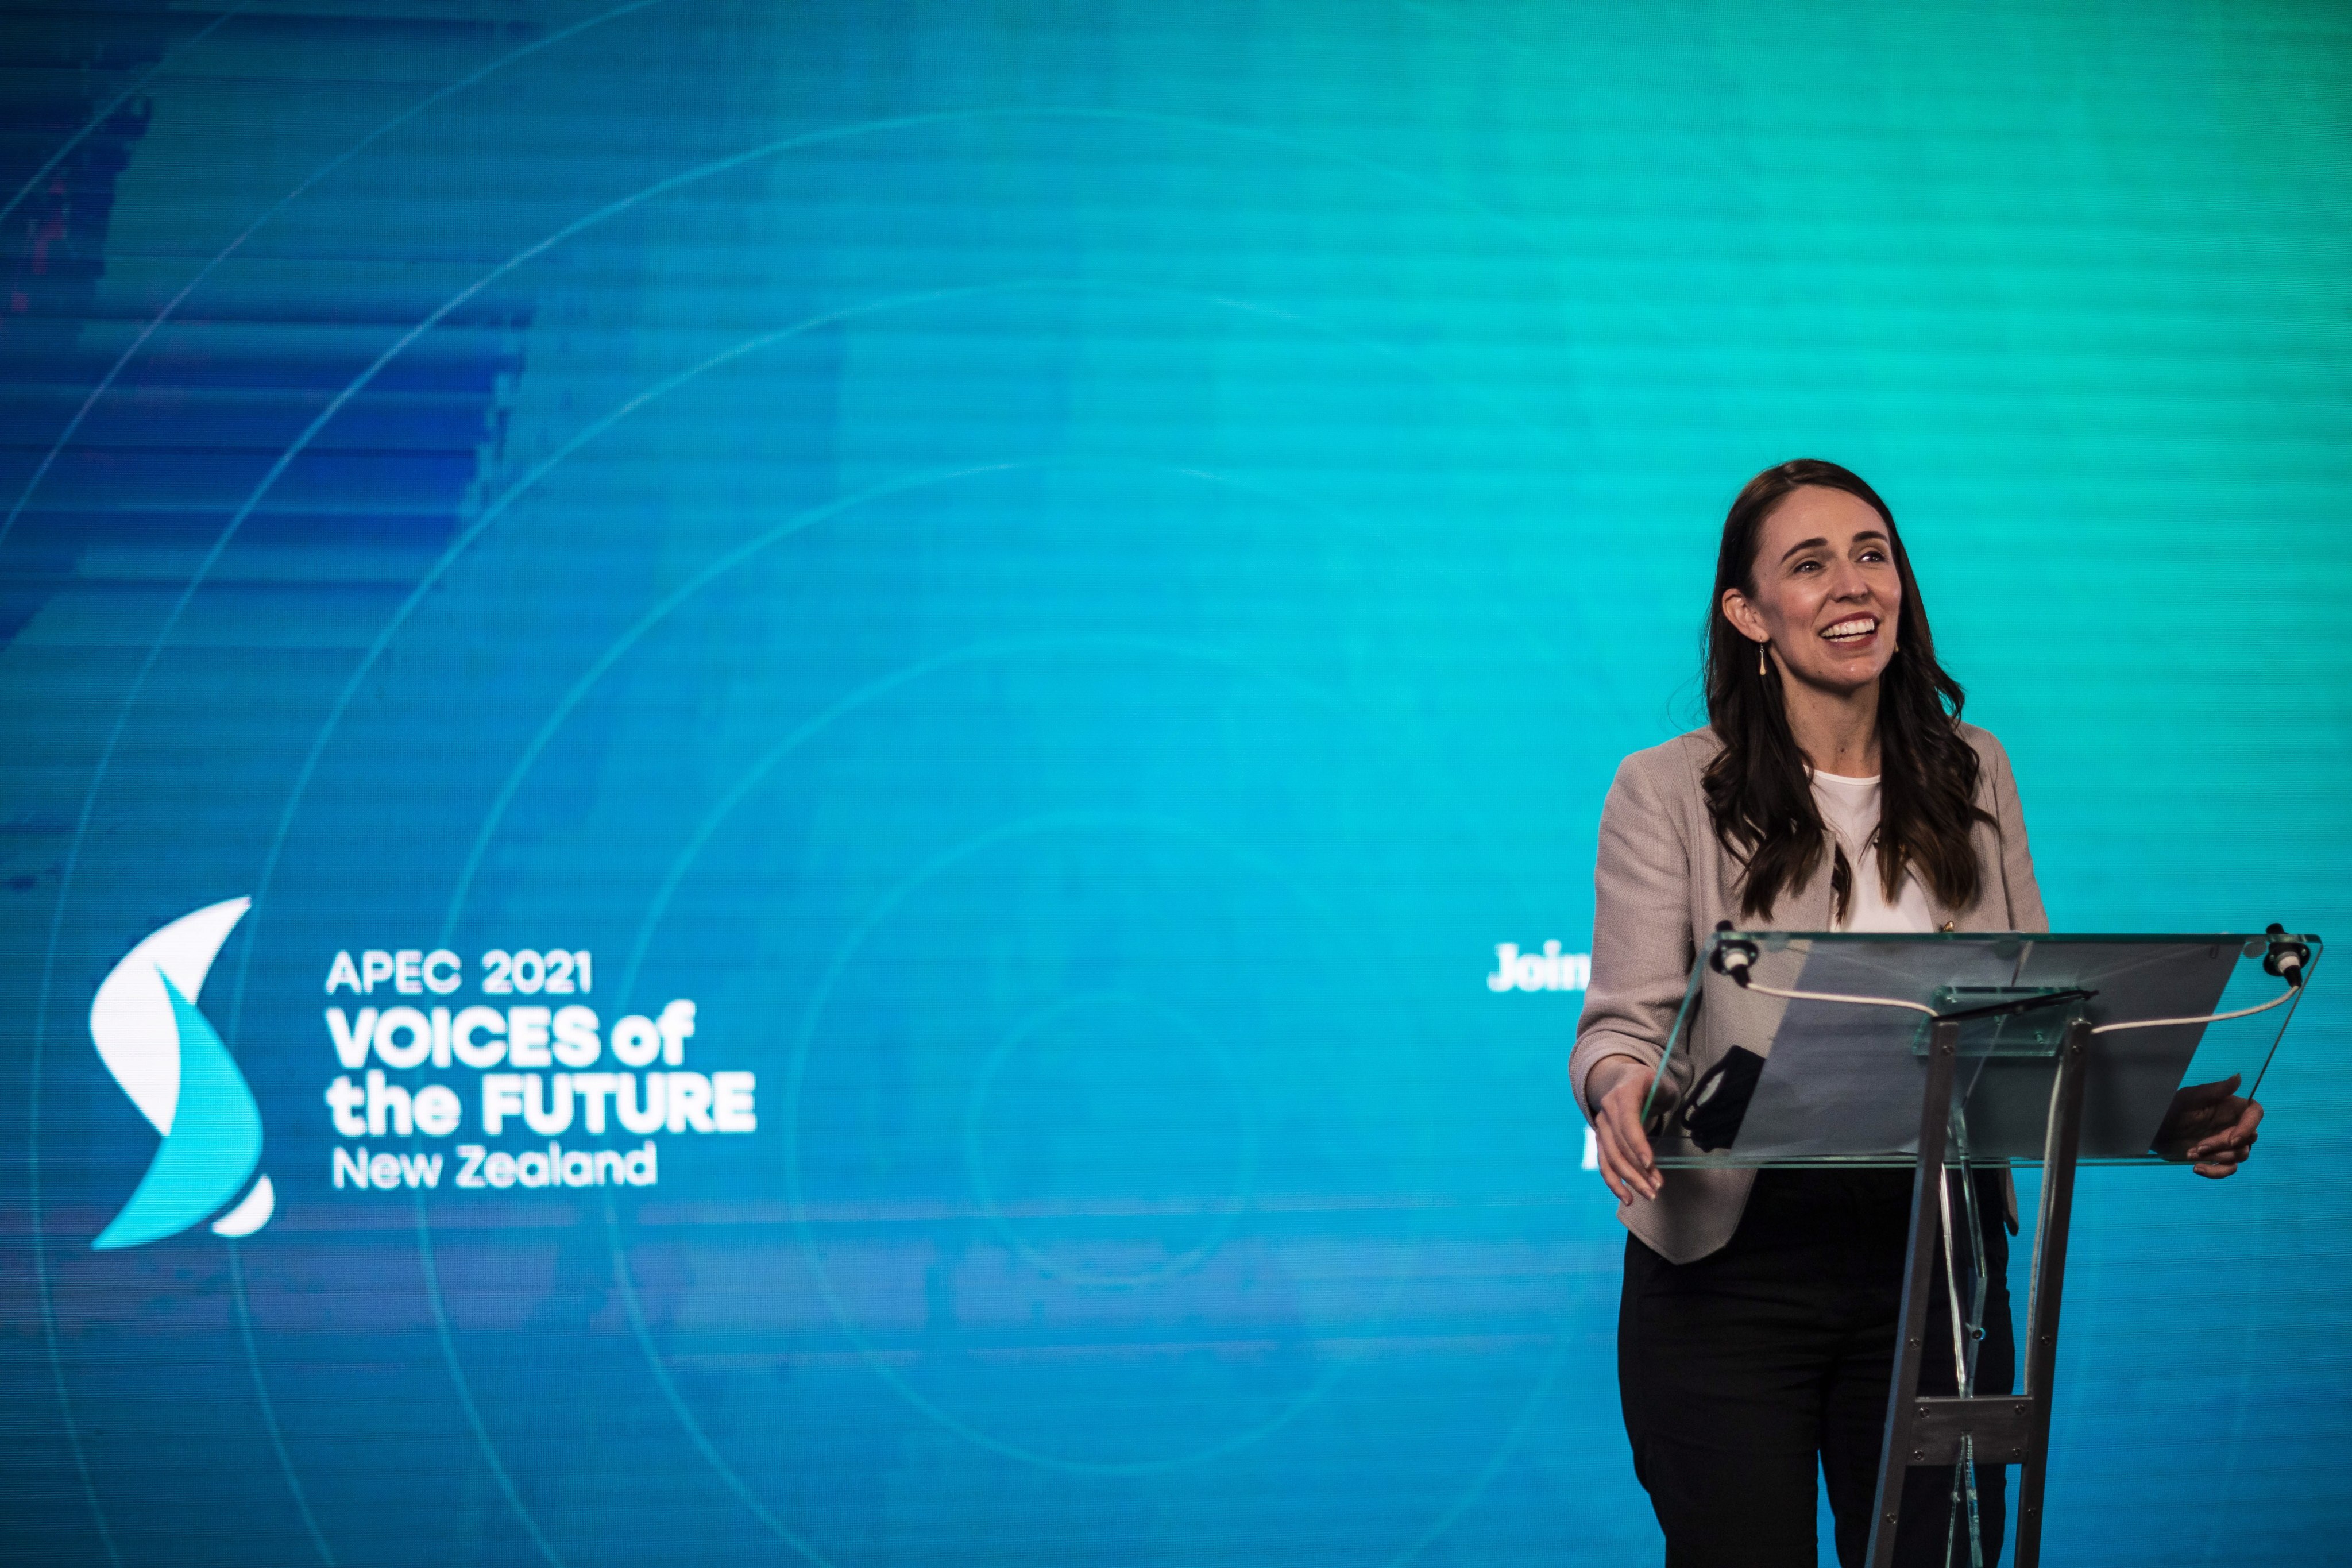 Prime Minister of New Zealand and Apec 2021 chair Jacinda Ardern attends the Voices of the Future event for youth delegates, in Wellington, New Zealand, on November 10. Photo: EPA-EFE